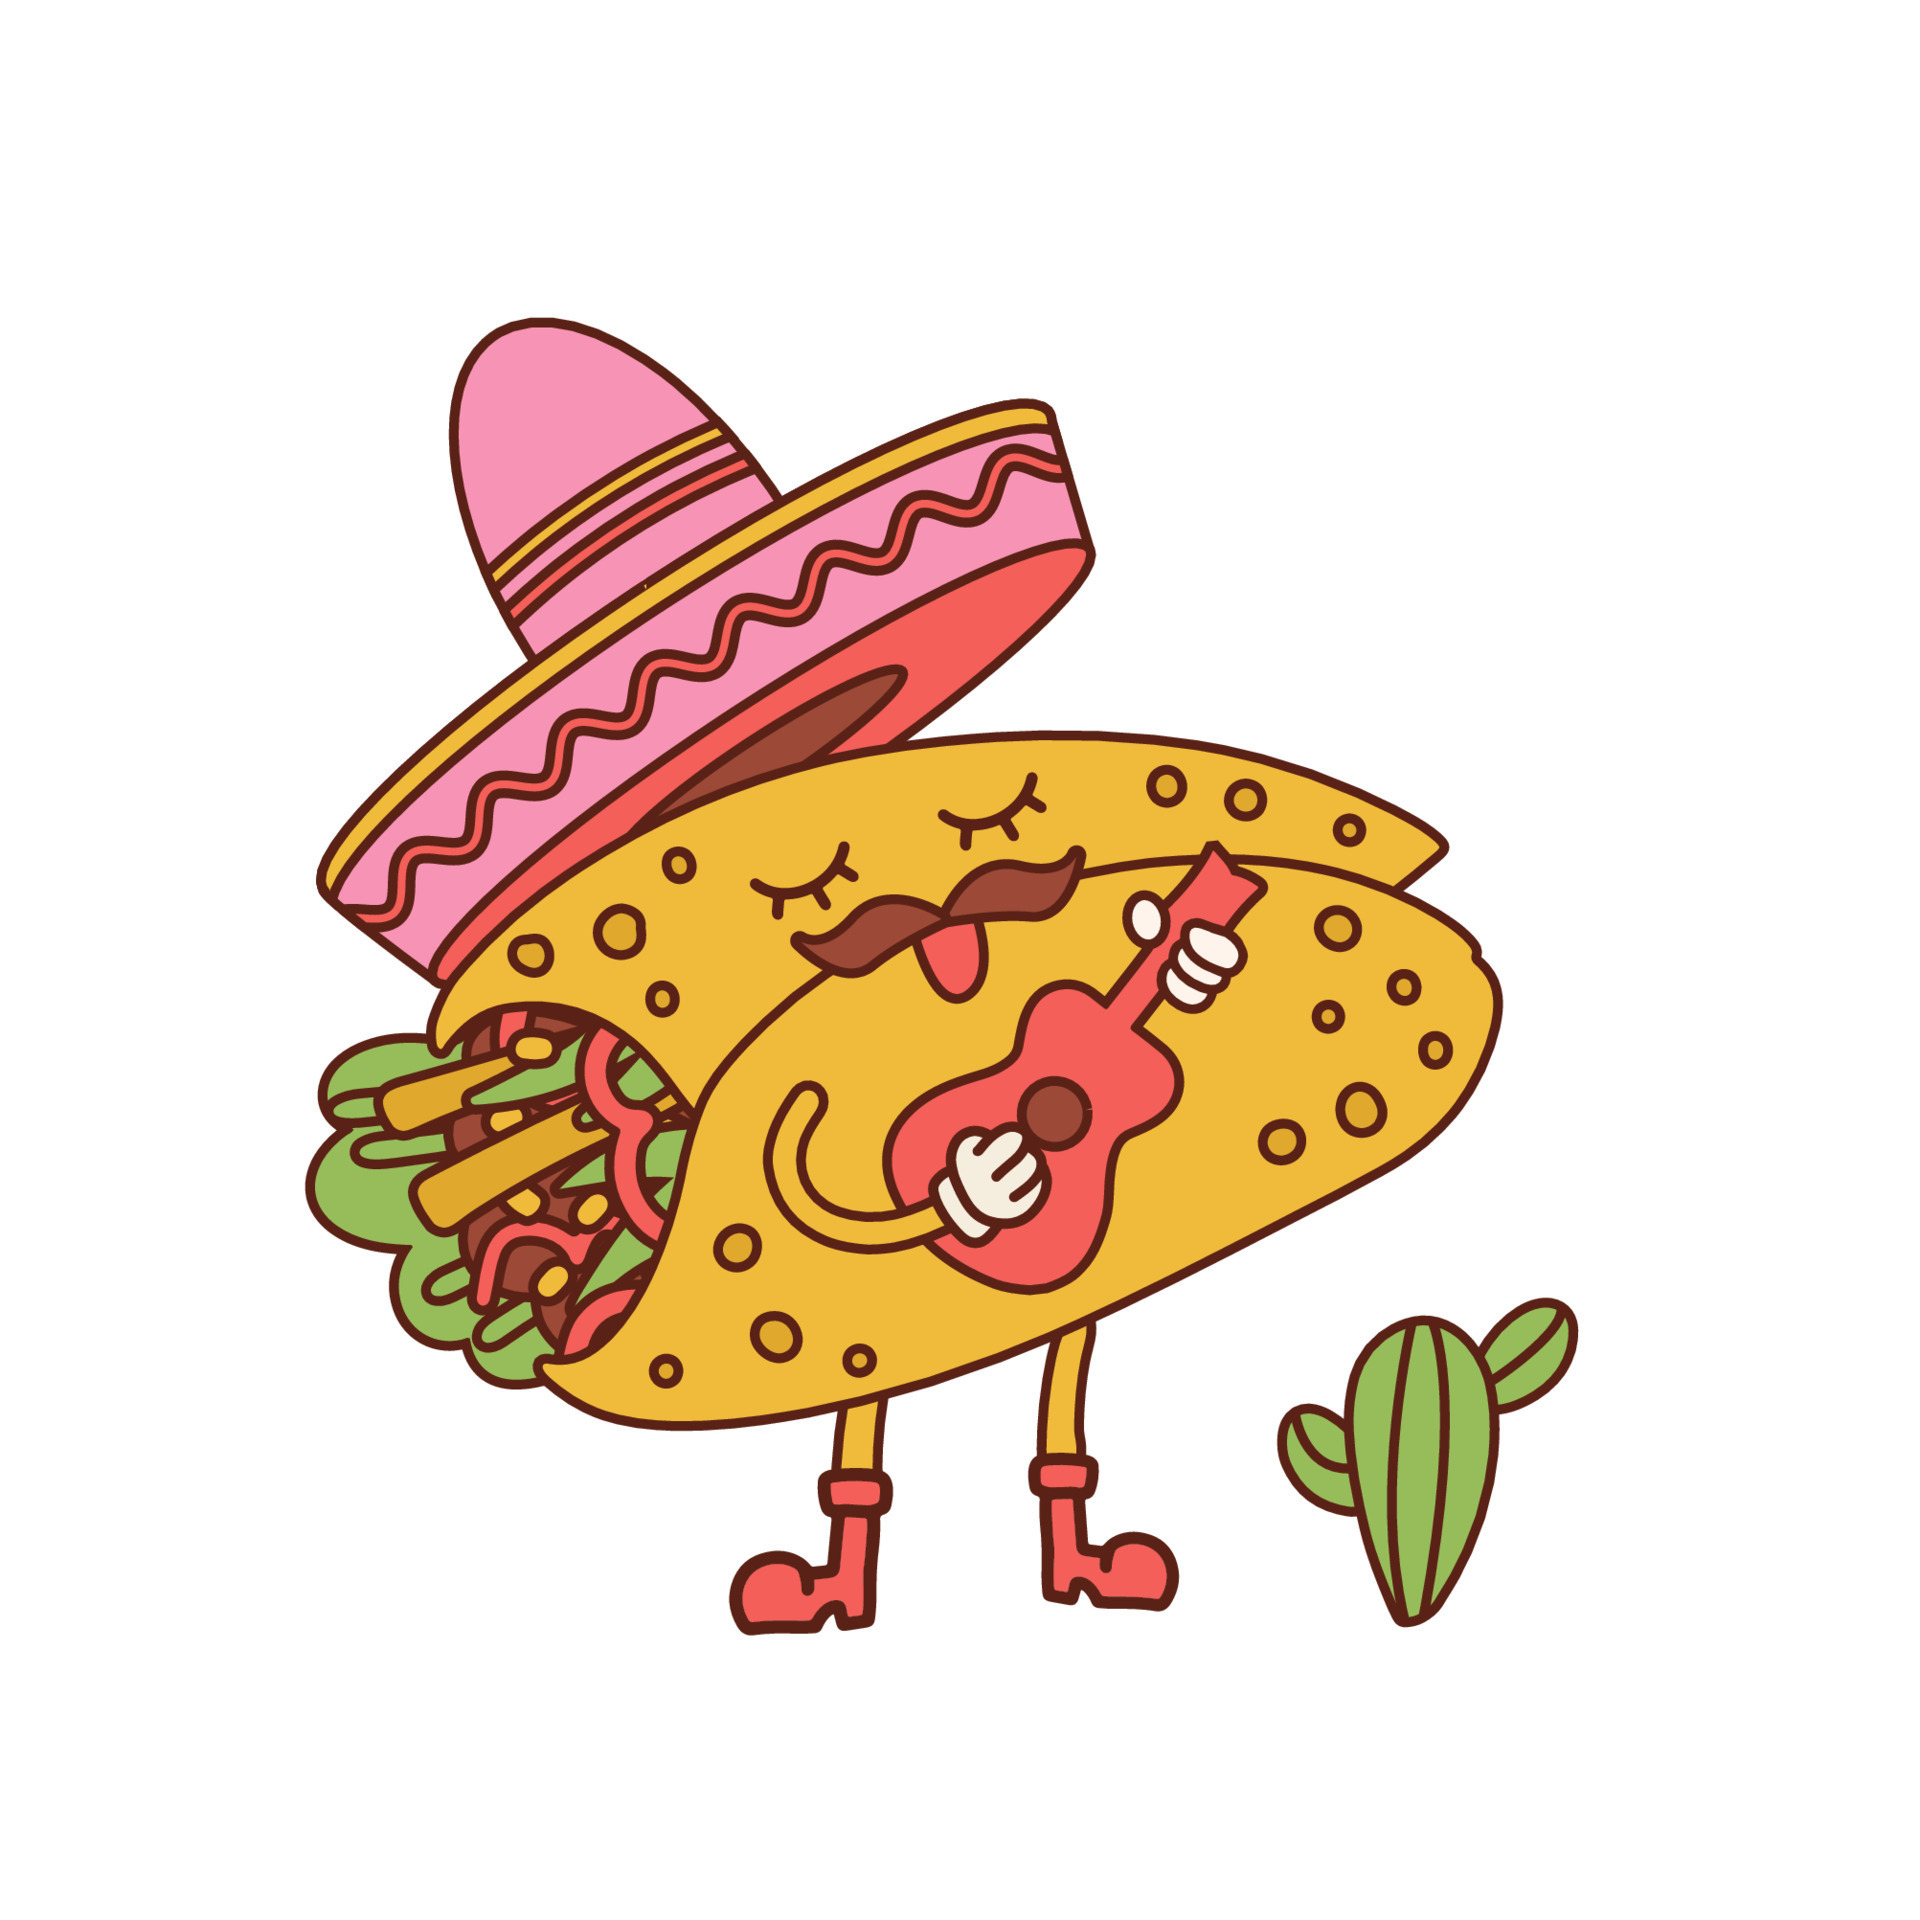 Cute retro toon burrito mascot with sombrero and guitar icon. Vintage  Cartoon of mexican food character playng music and singing song. Hand drawn  vector illustration isolated on white background 15388321 Vector Art